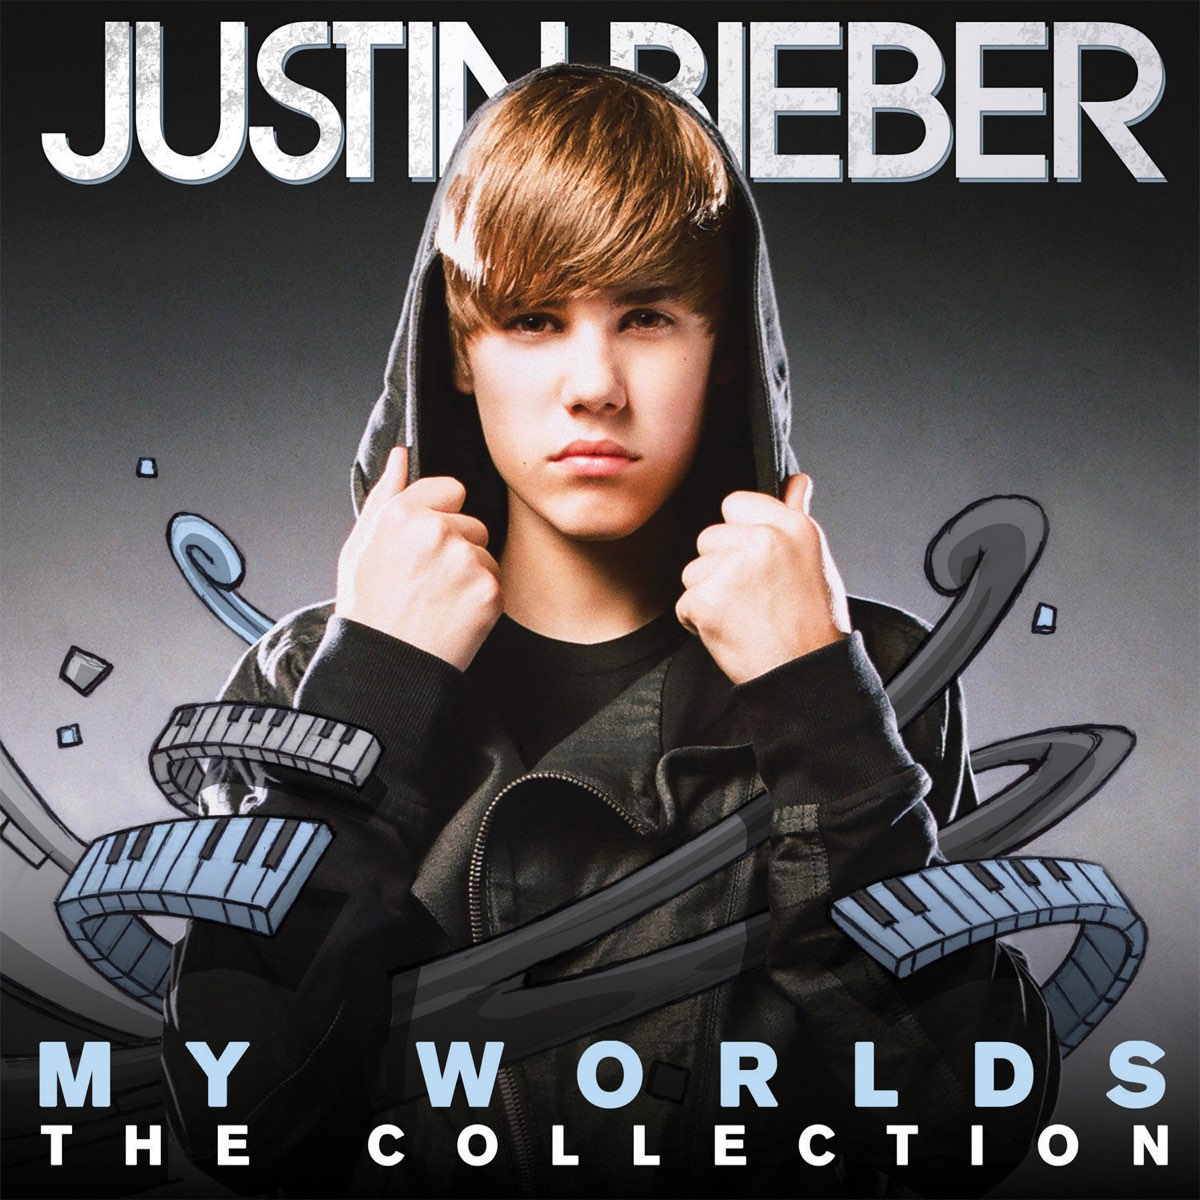 My Worlds - The Collection by Justin Bieber on Apple Music